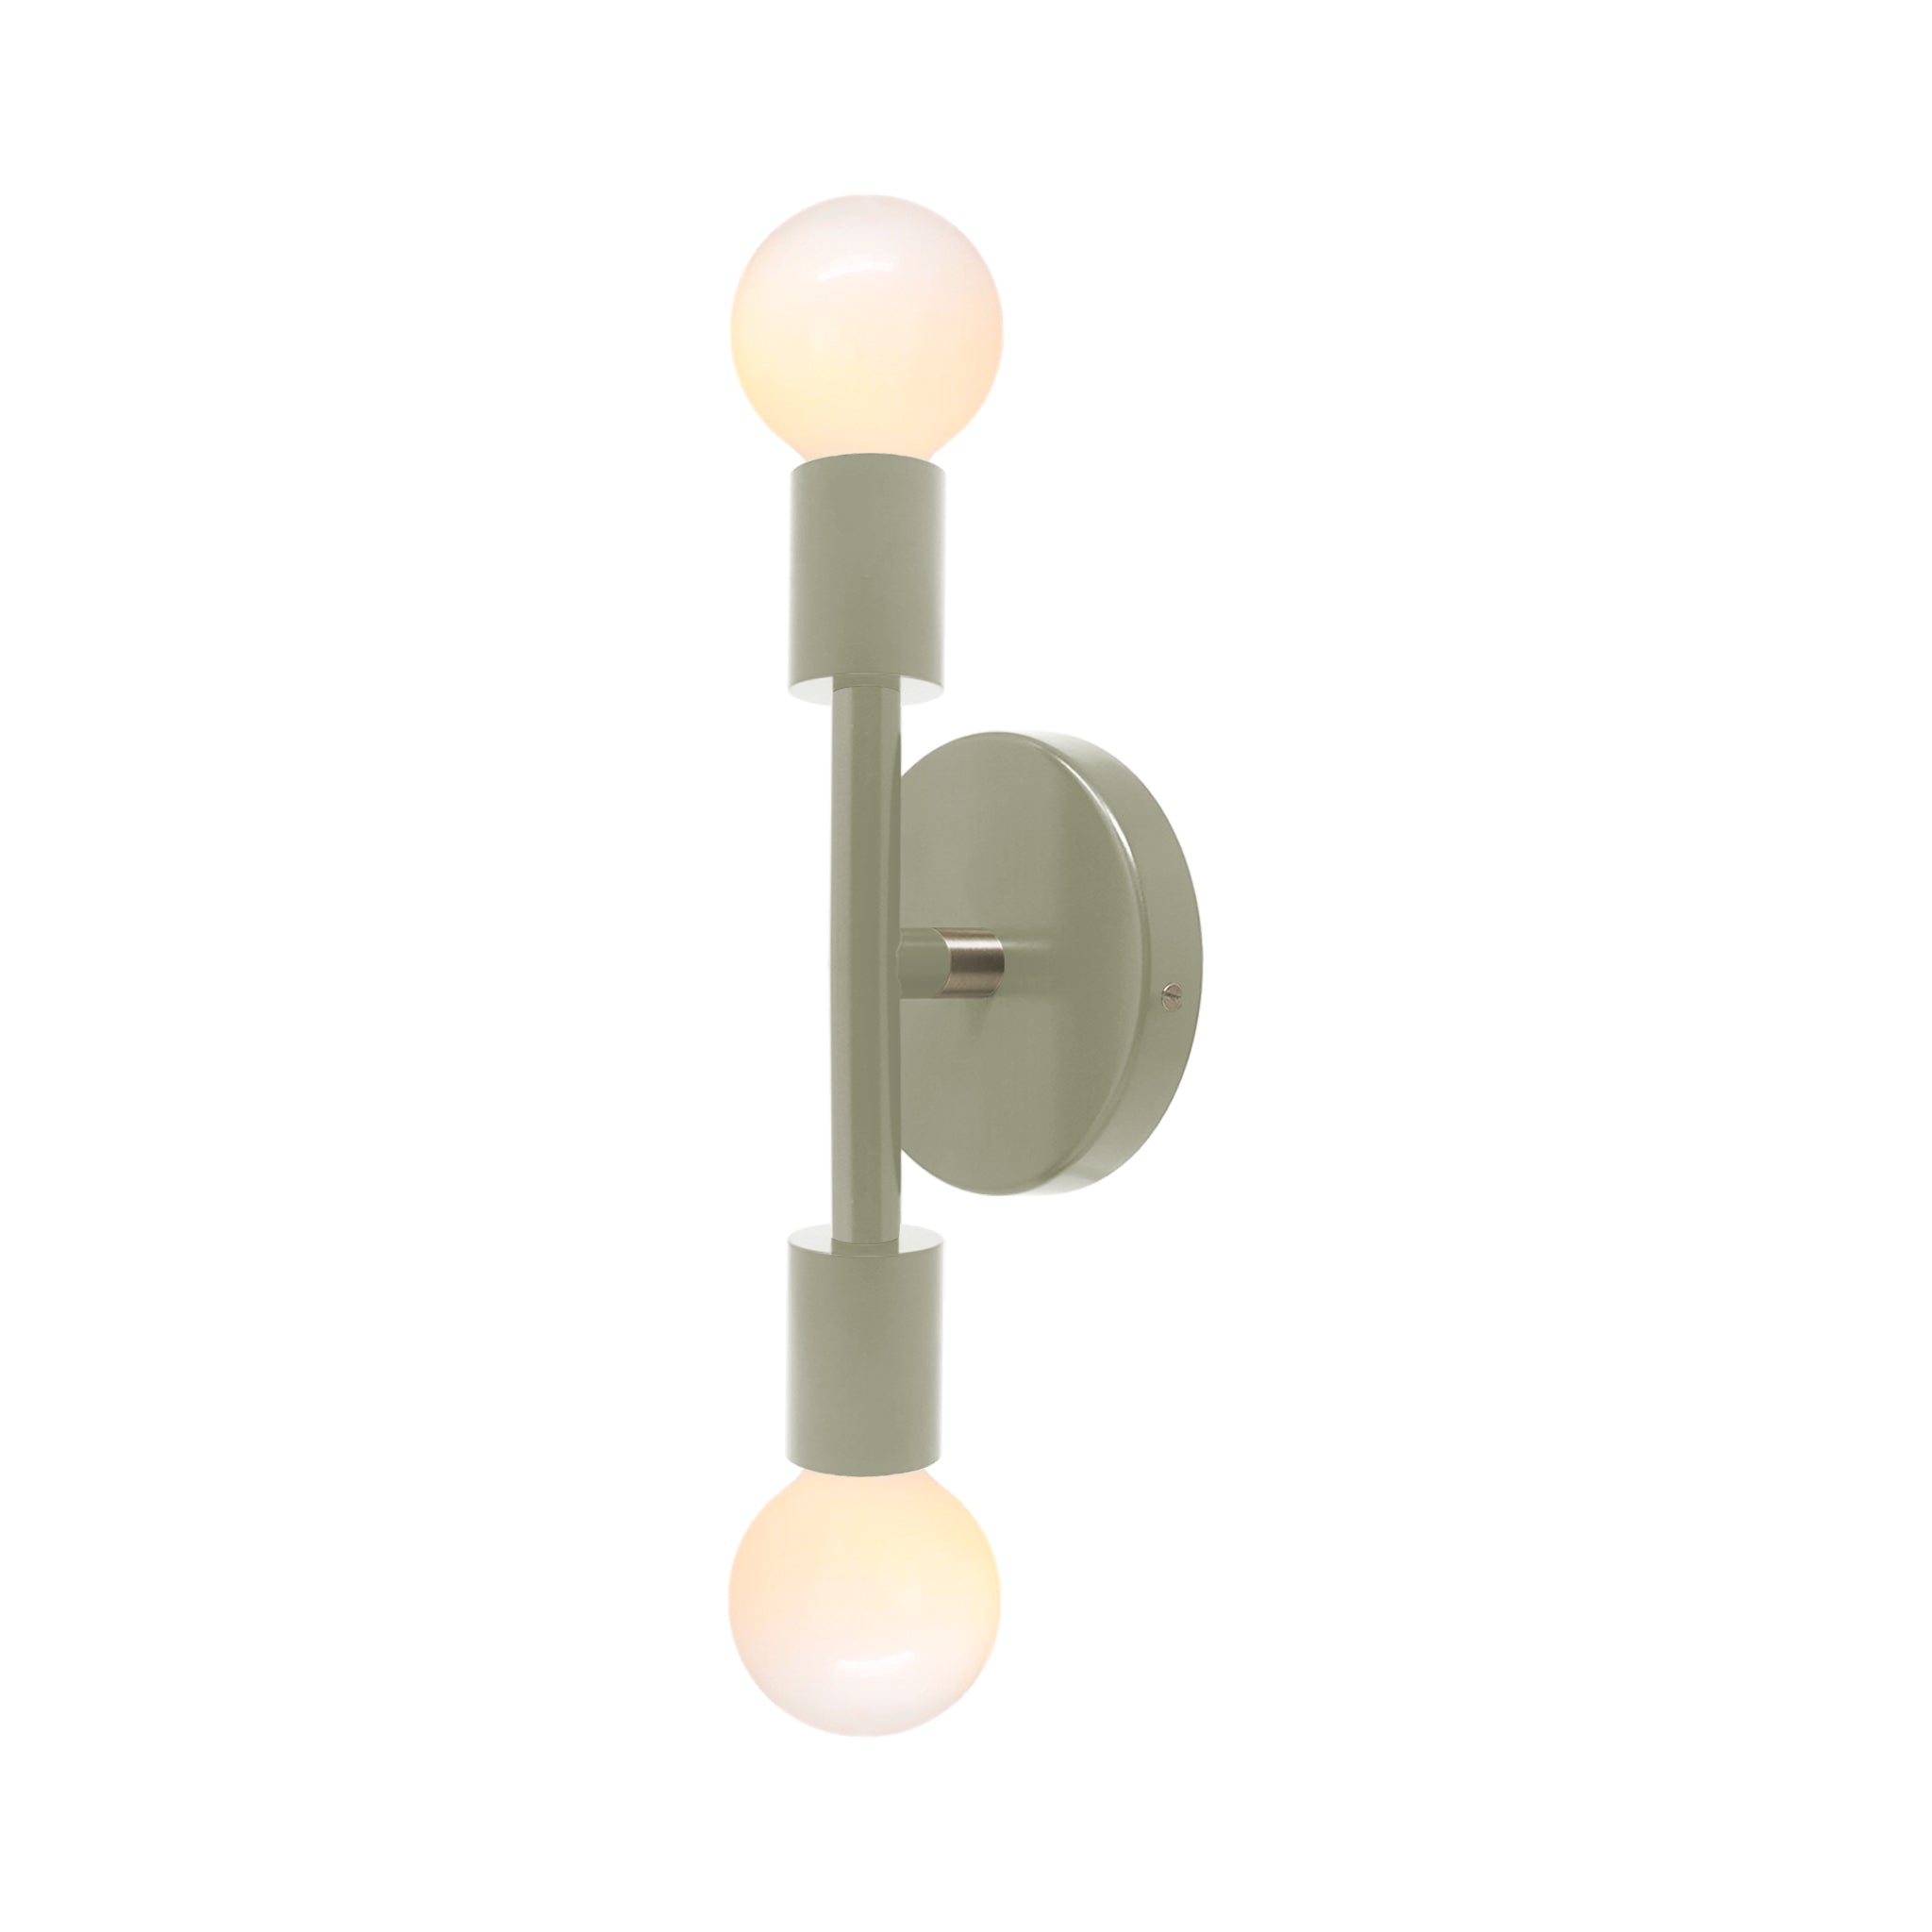 Nickel and spa color Pilot sconce 11" Dutton Brown lighting